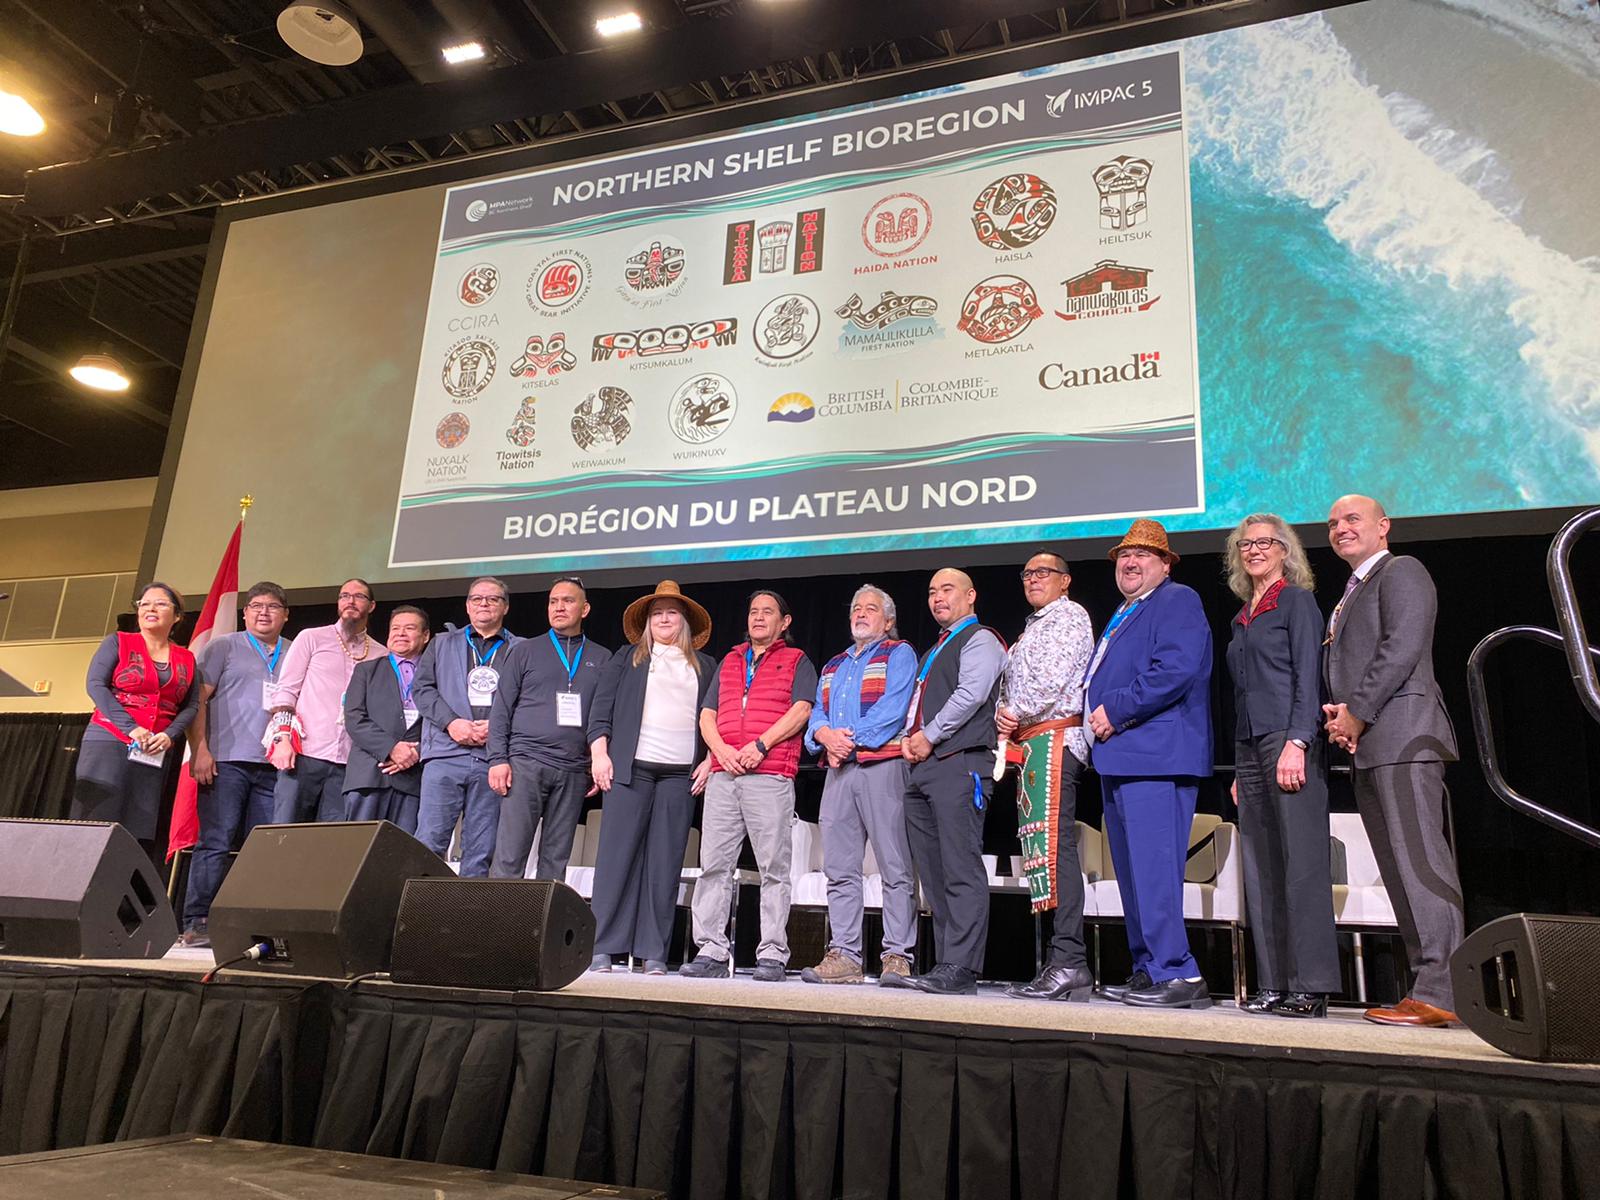 Group of Indigenous leaders on stage at IMPAC5 oceans conference 